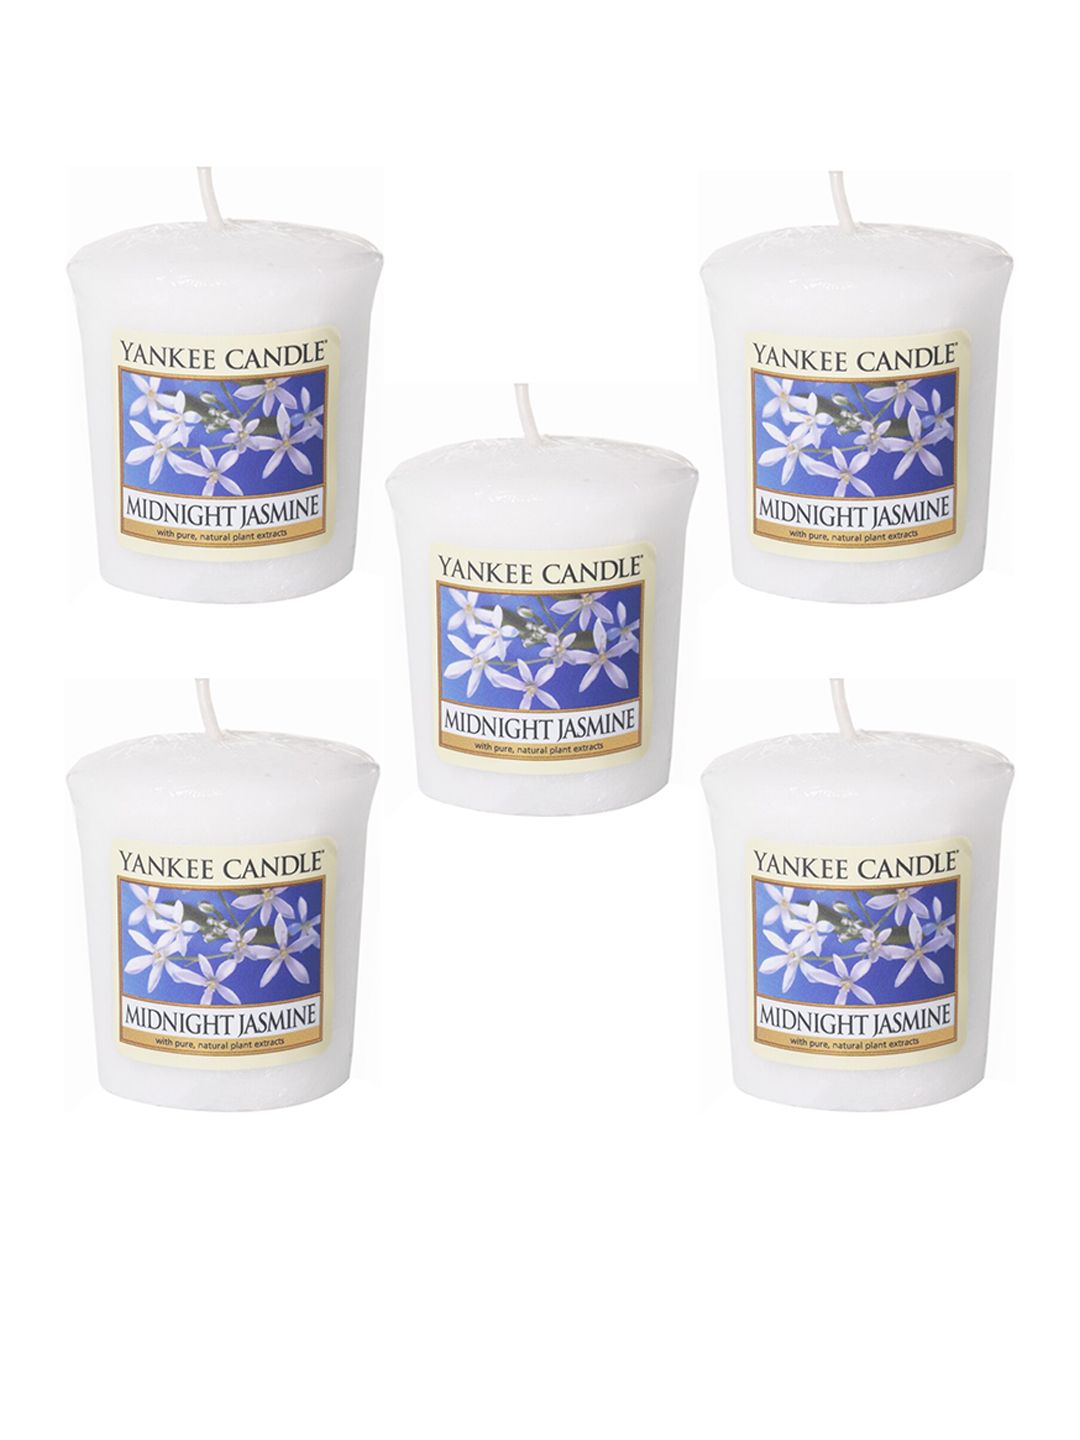 YANKEE CANDLE Set Of 5 White Midnight Jasmine Scented Candles Price in India